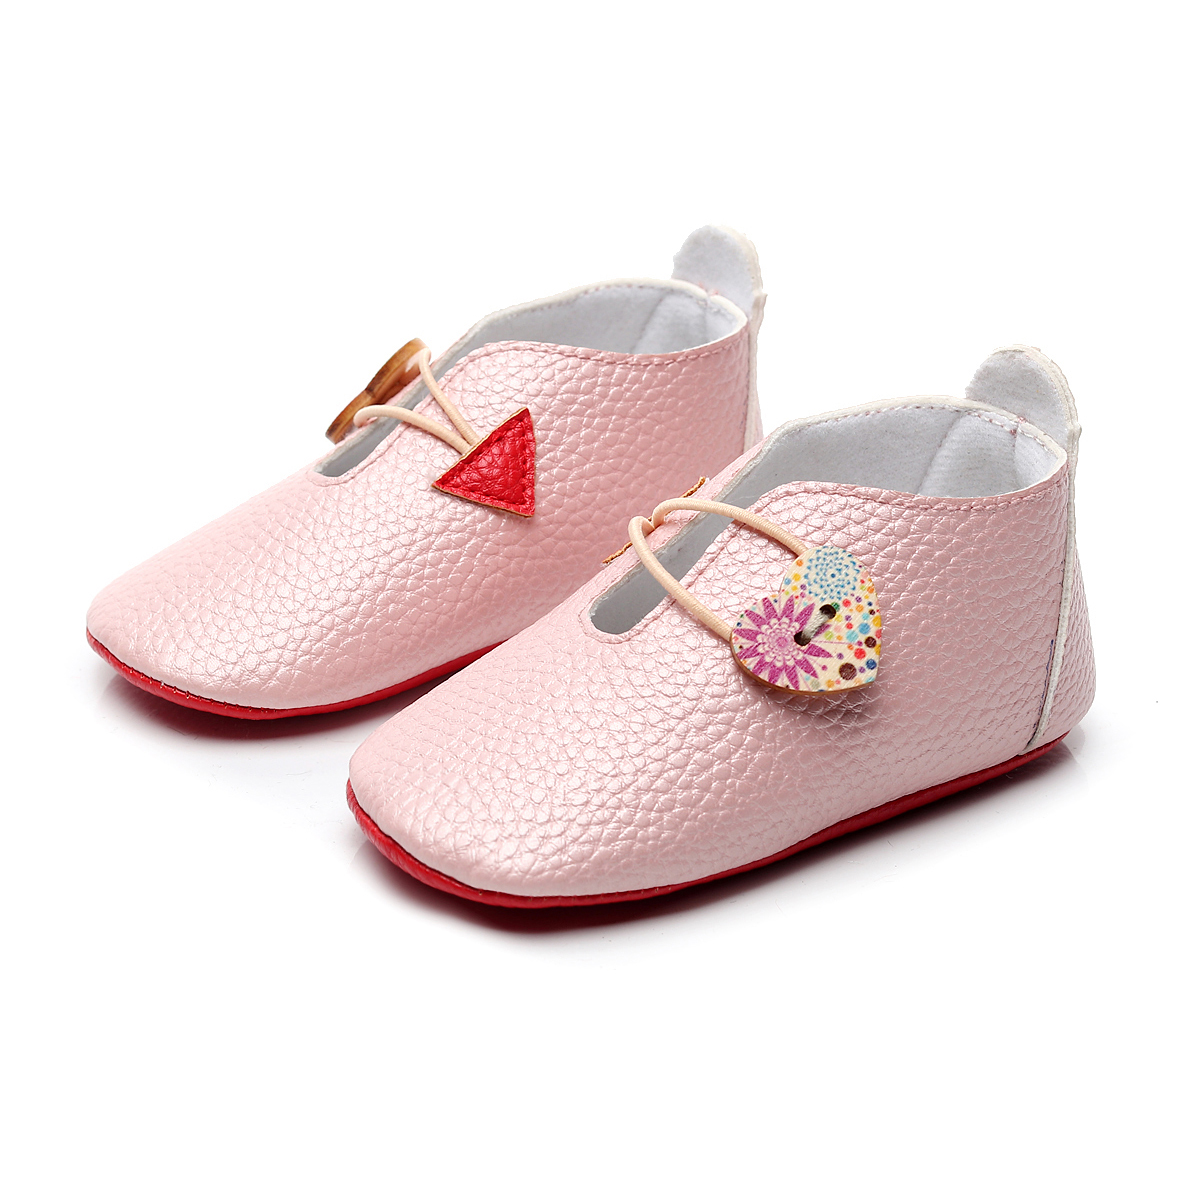 Baby / Toddler Floral Print Heart Applique Stretchy Shoes